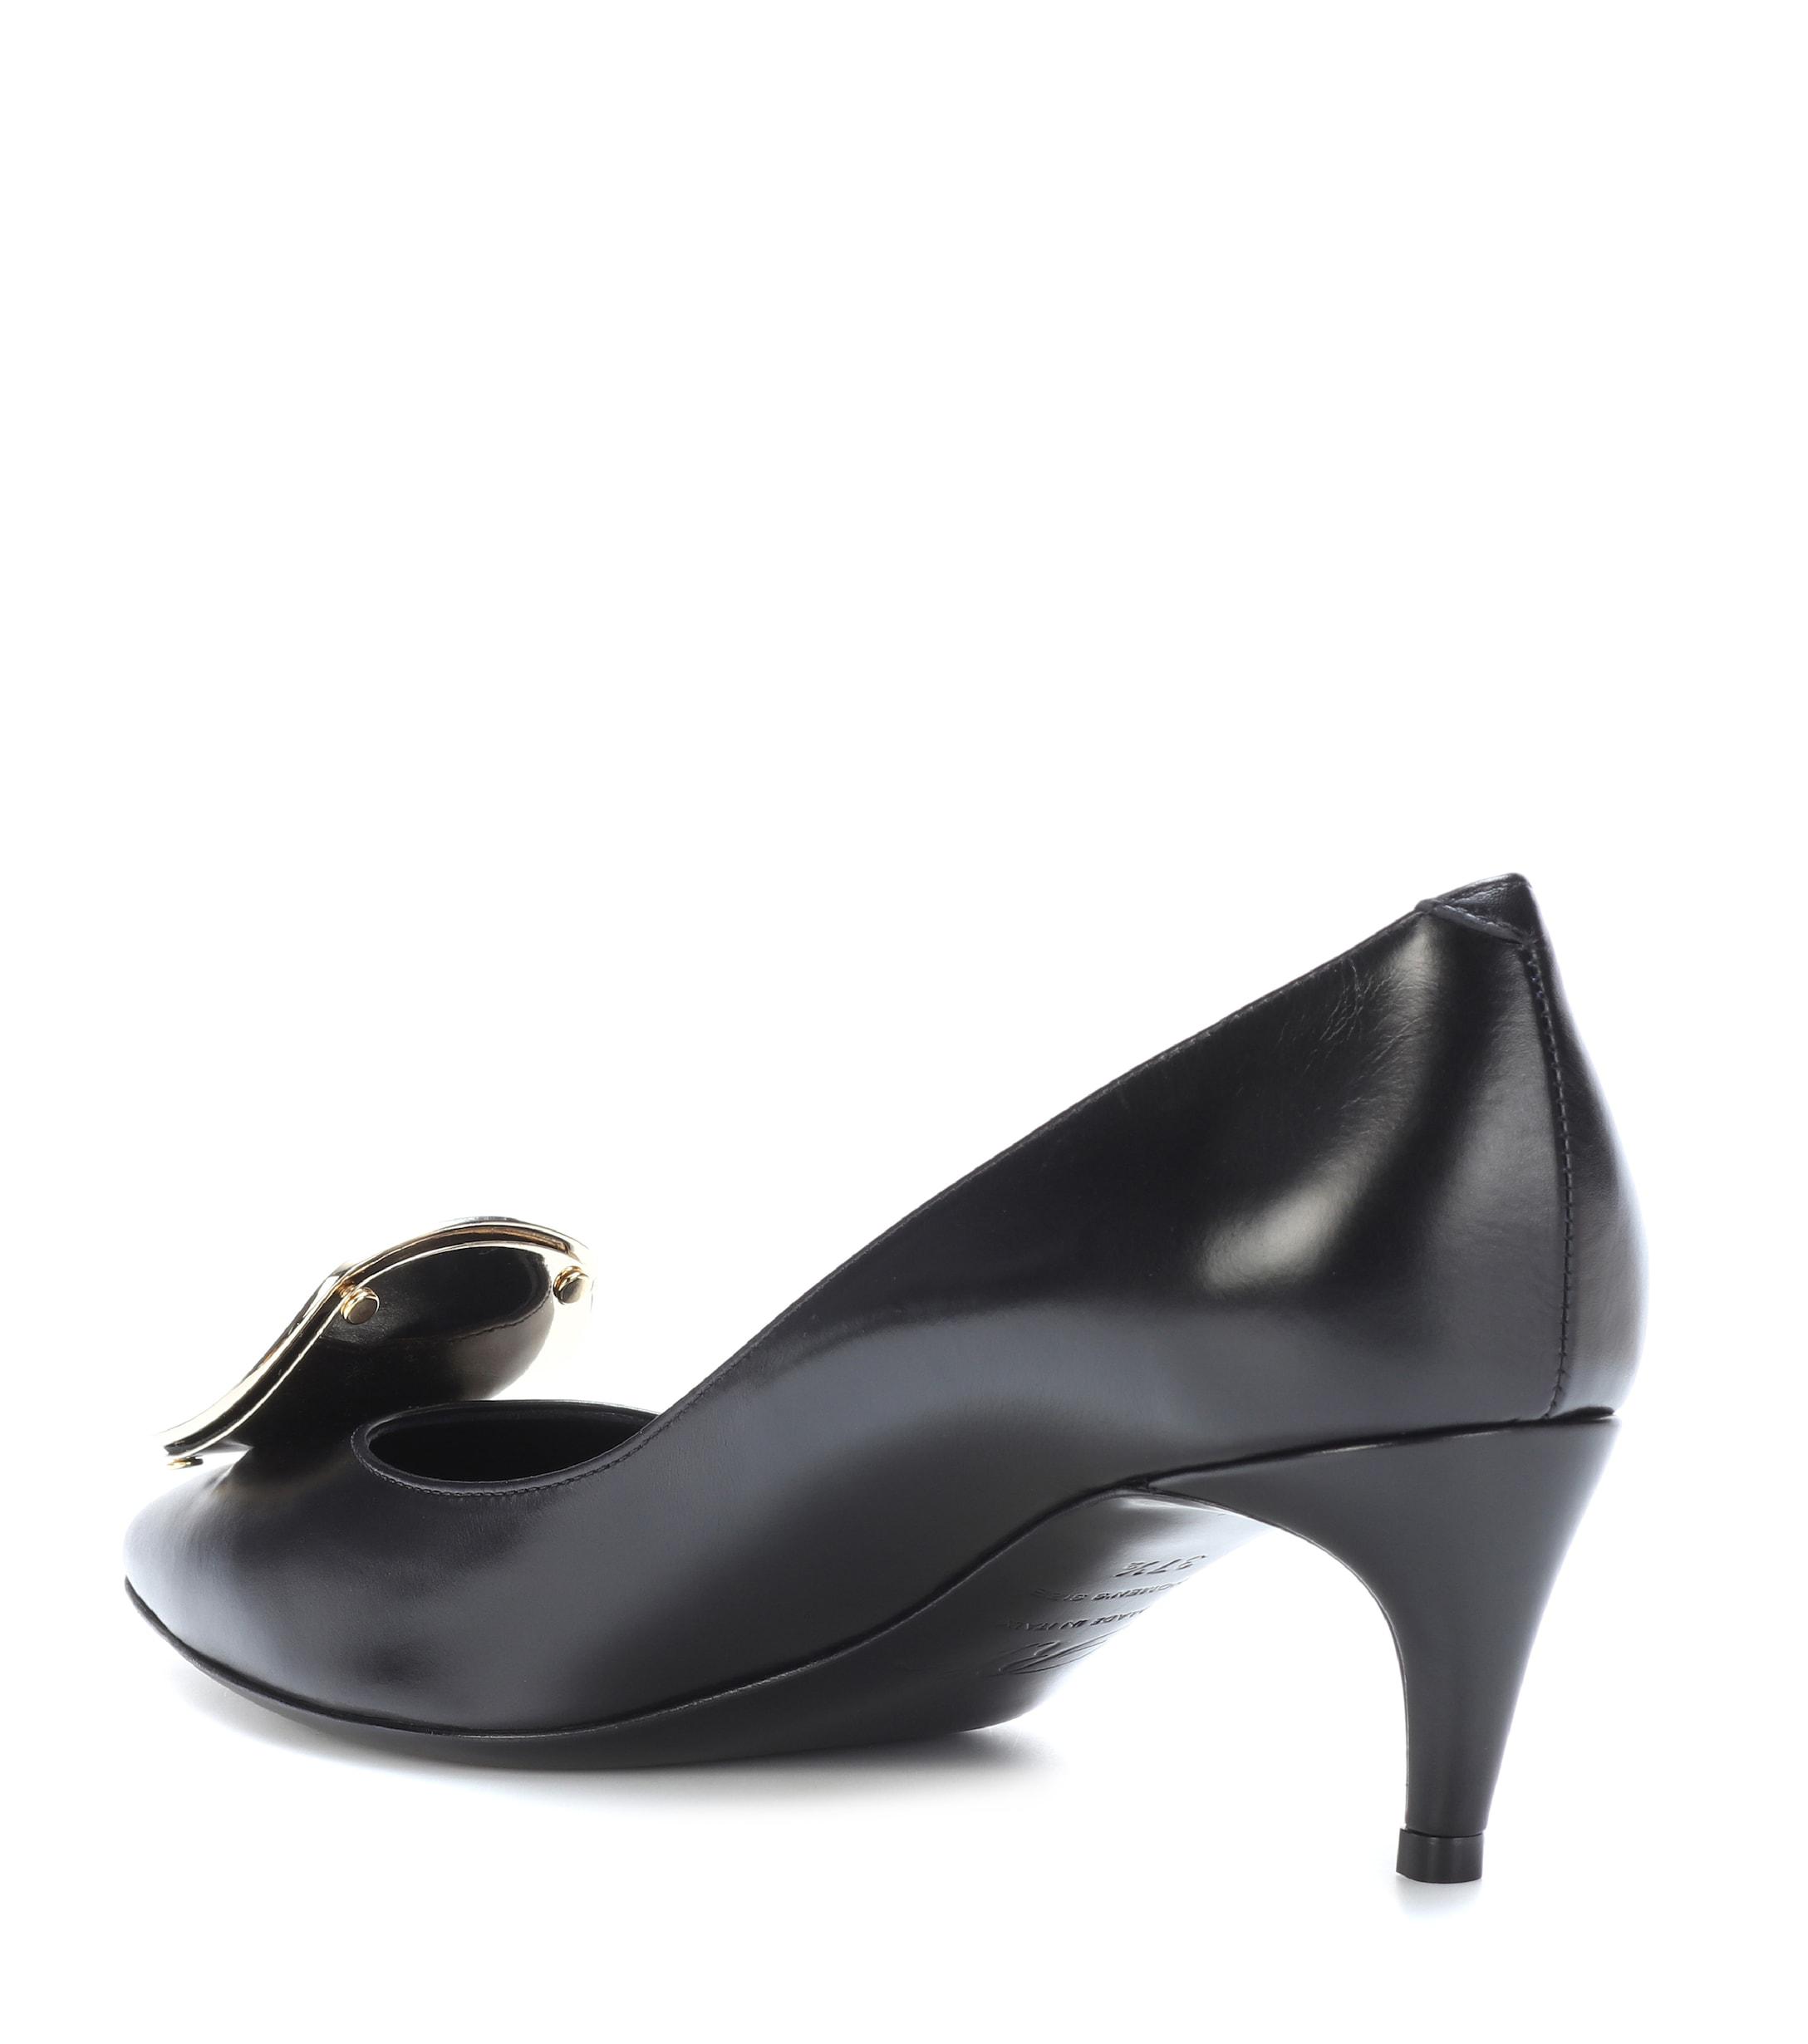 Roger Vivier Sexy Choc Leather Pumps in Black - Lyst